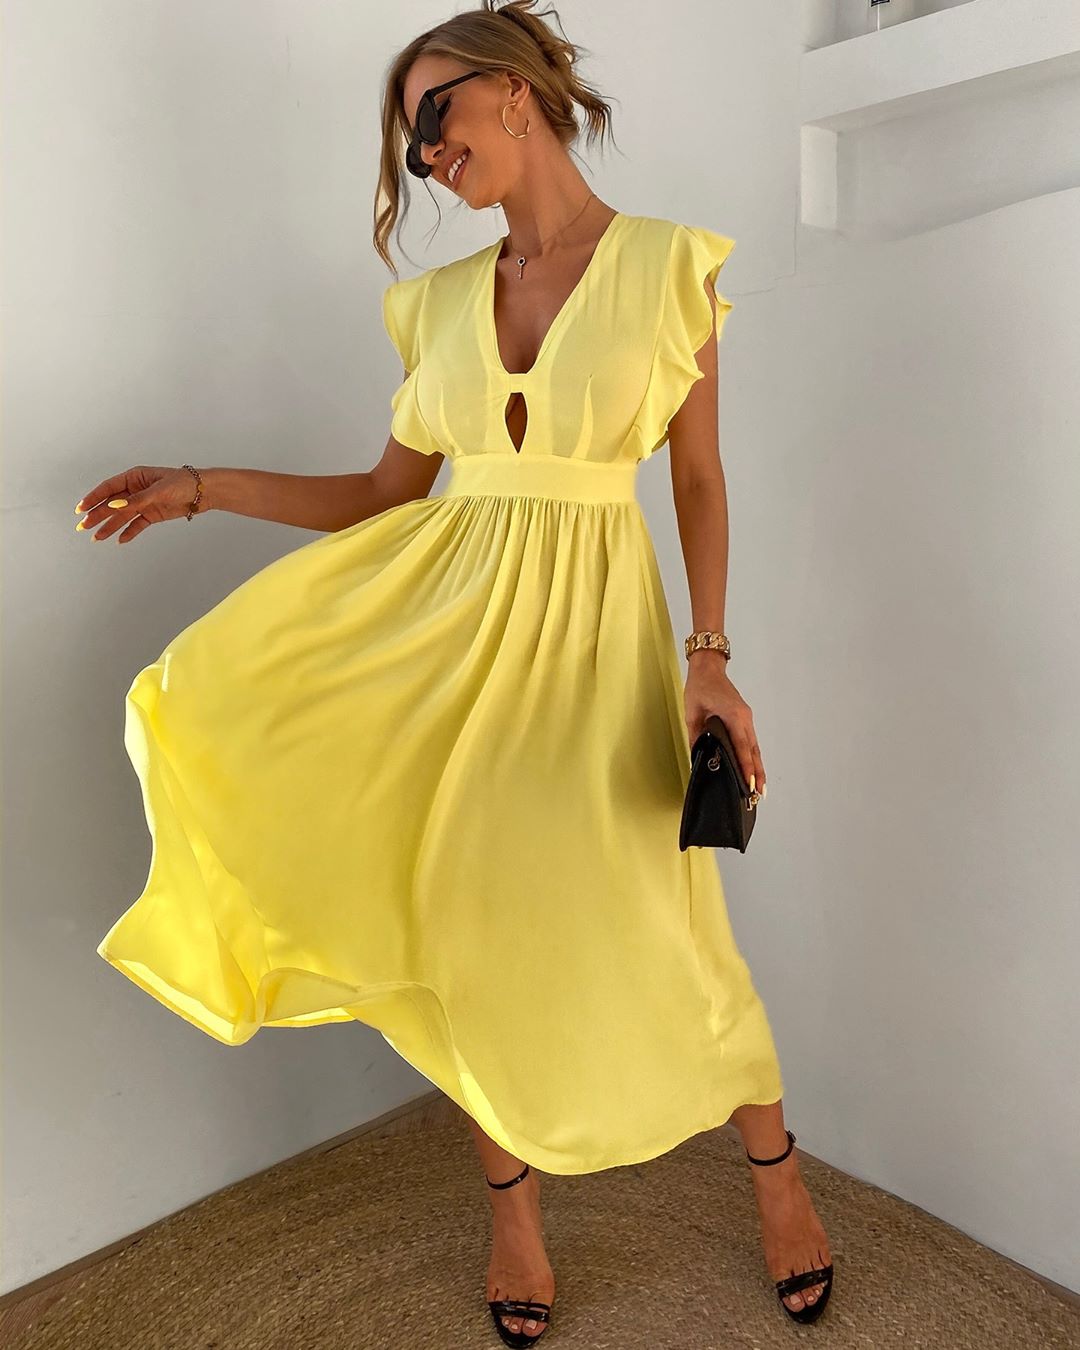 boutiquefeel_official - easy and breezy take on the summer⁠
🔍SKU：YSK3496⁠
Shop:boutiquefeel.com⁠